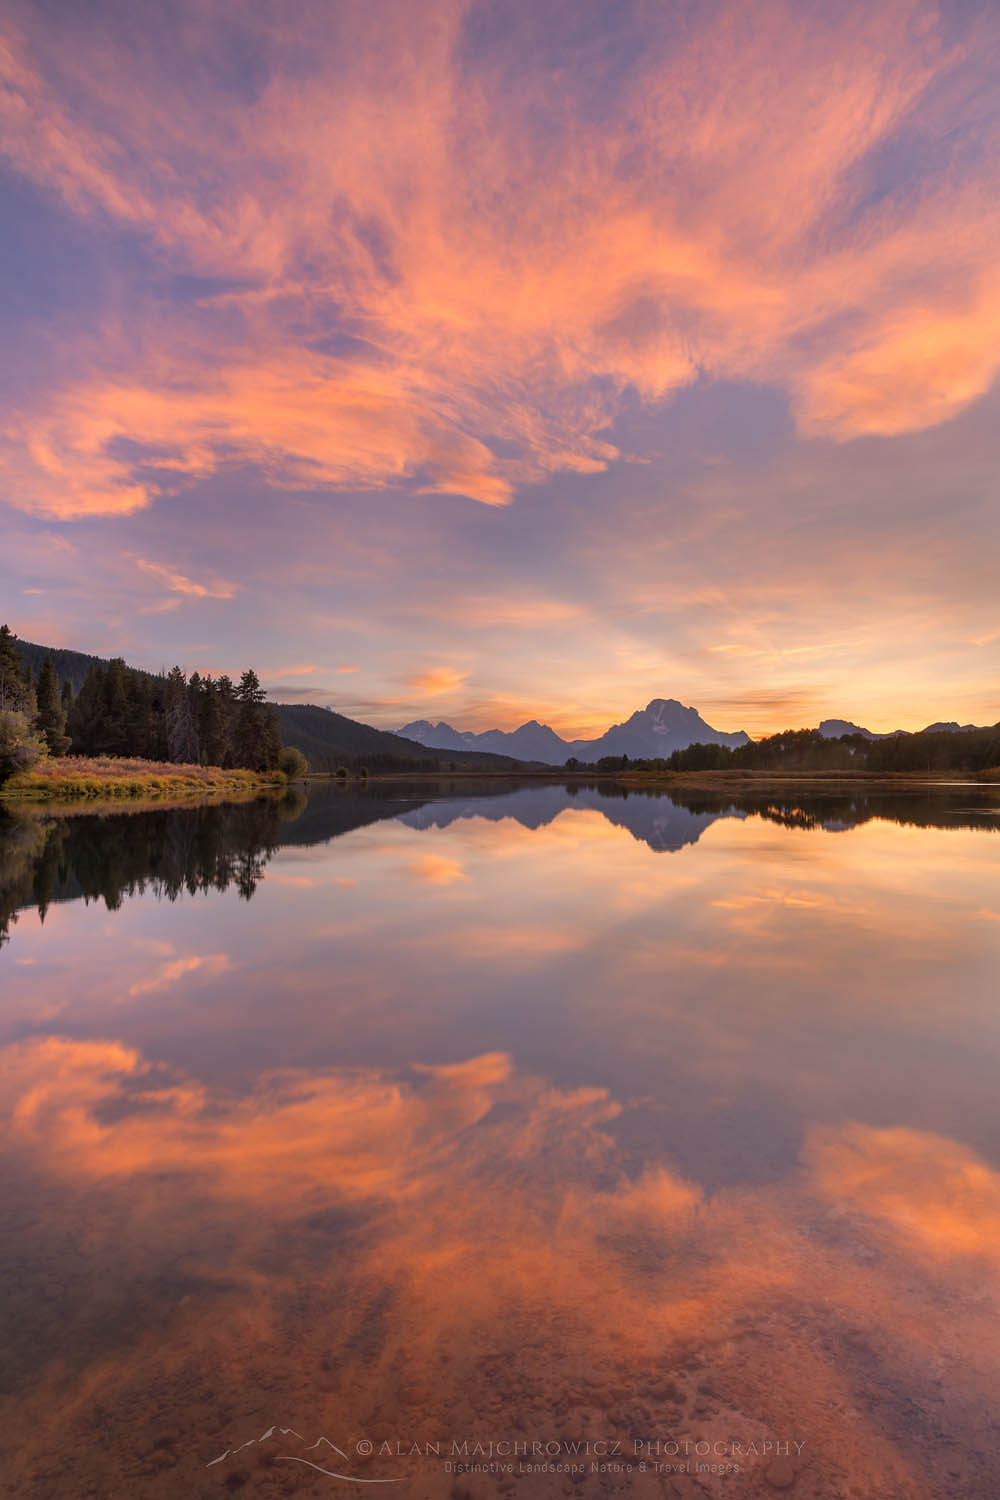 Clouds glowing red and orange in the light of the setting sun reflected in still waters of the Snake River at Oxbow Bend, Grand Teton National Park Wyoming #67566